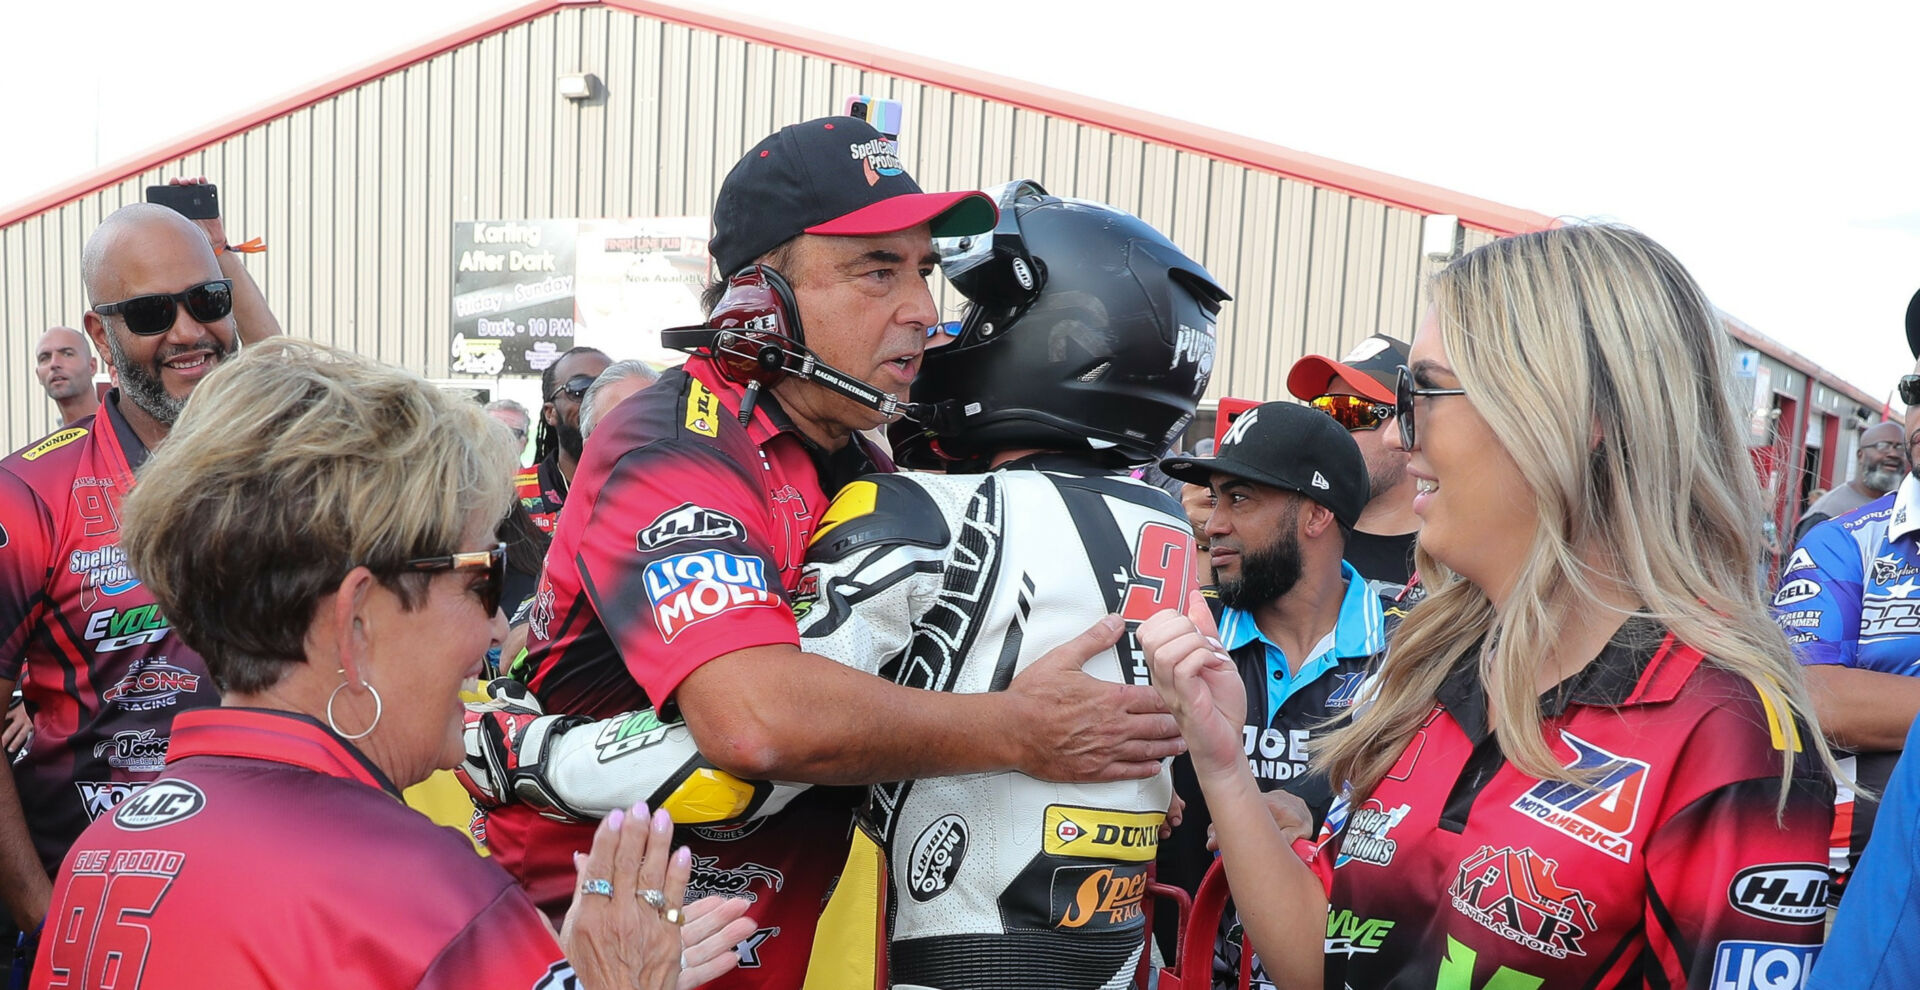 Frank Angel hugs rider Gus Rodio after Rodio finished second in MotoAmerica Junior Cup Race One at New Jersey Motorsports Park in 2021. Photo by Brian J. Nelson.